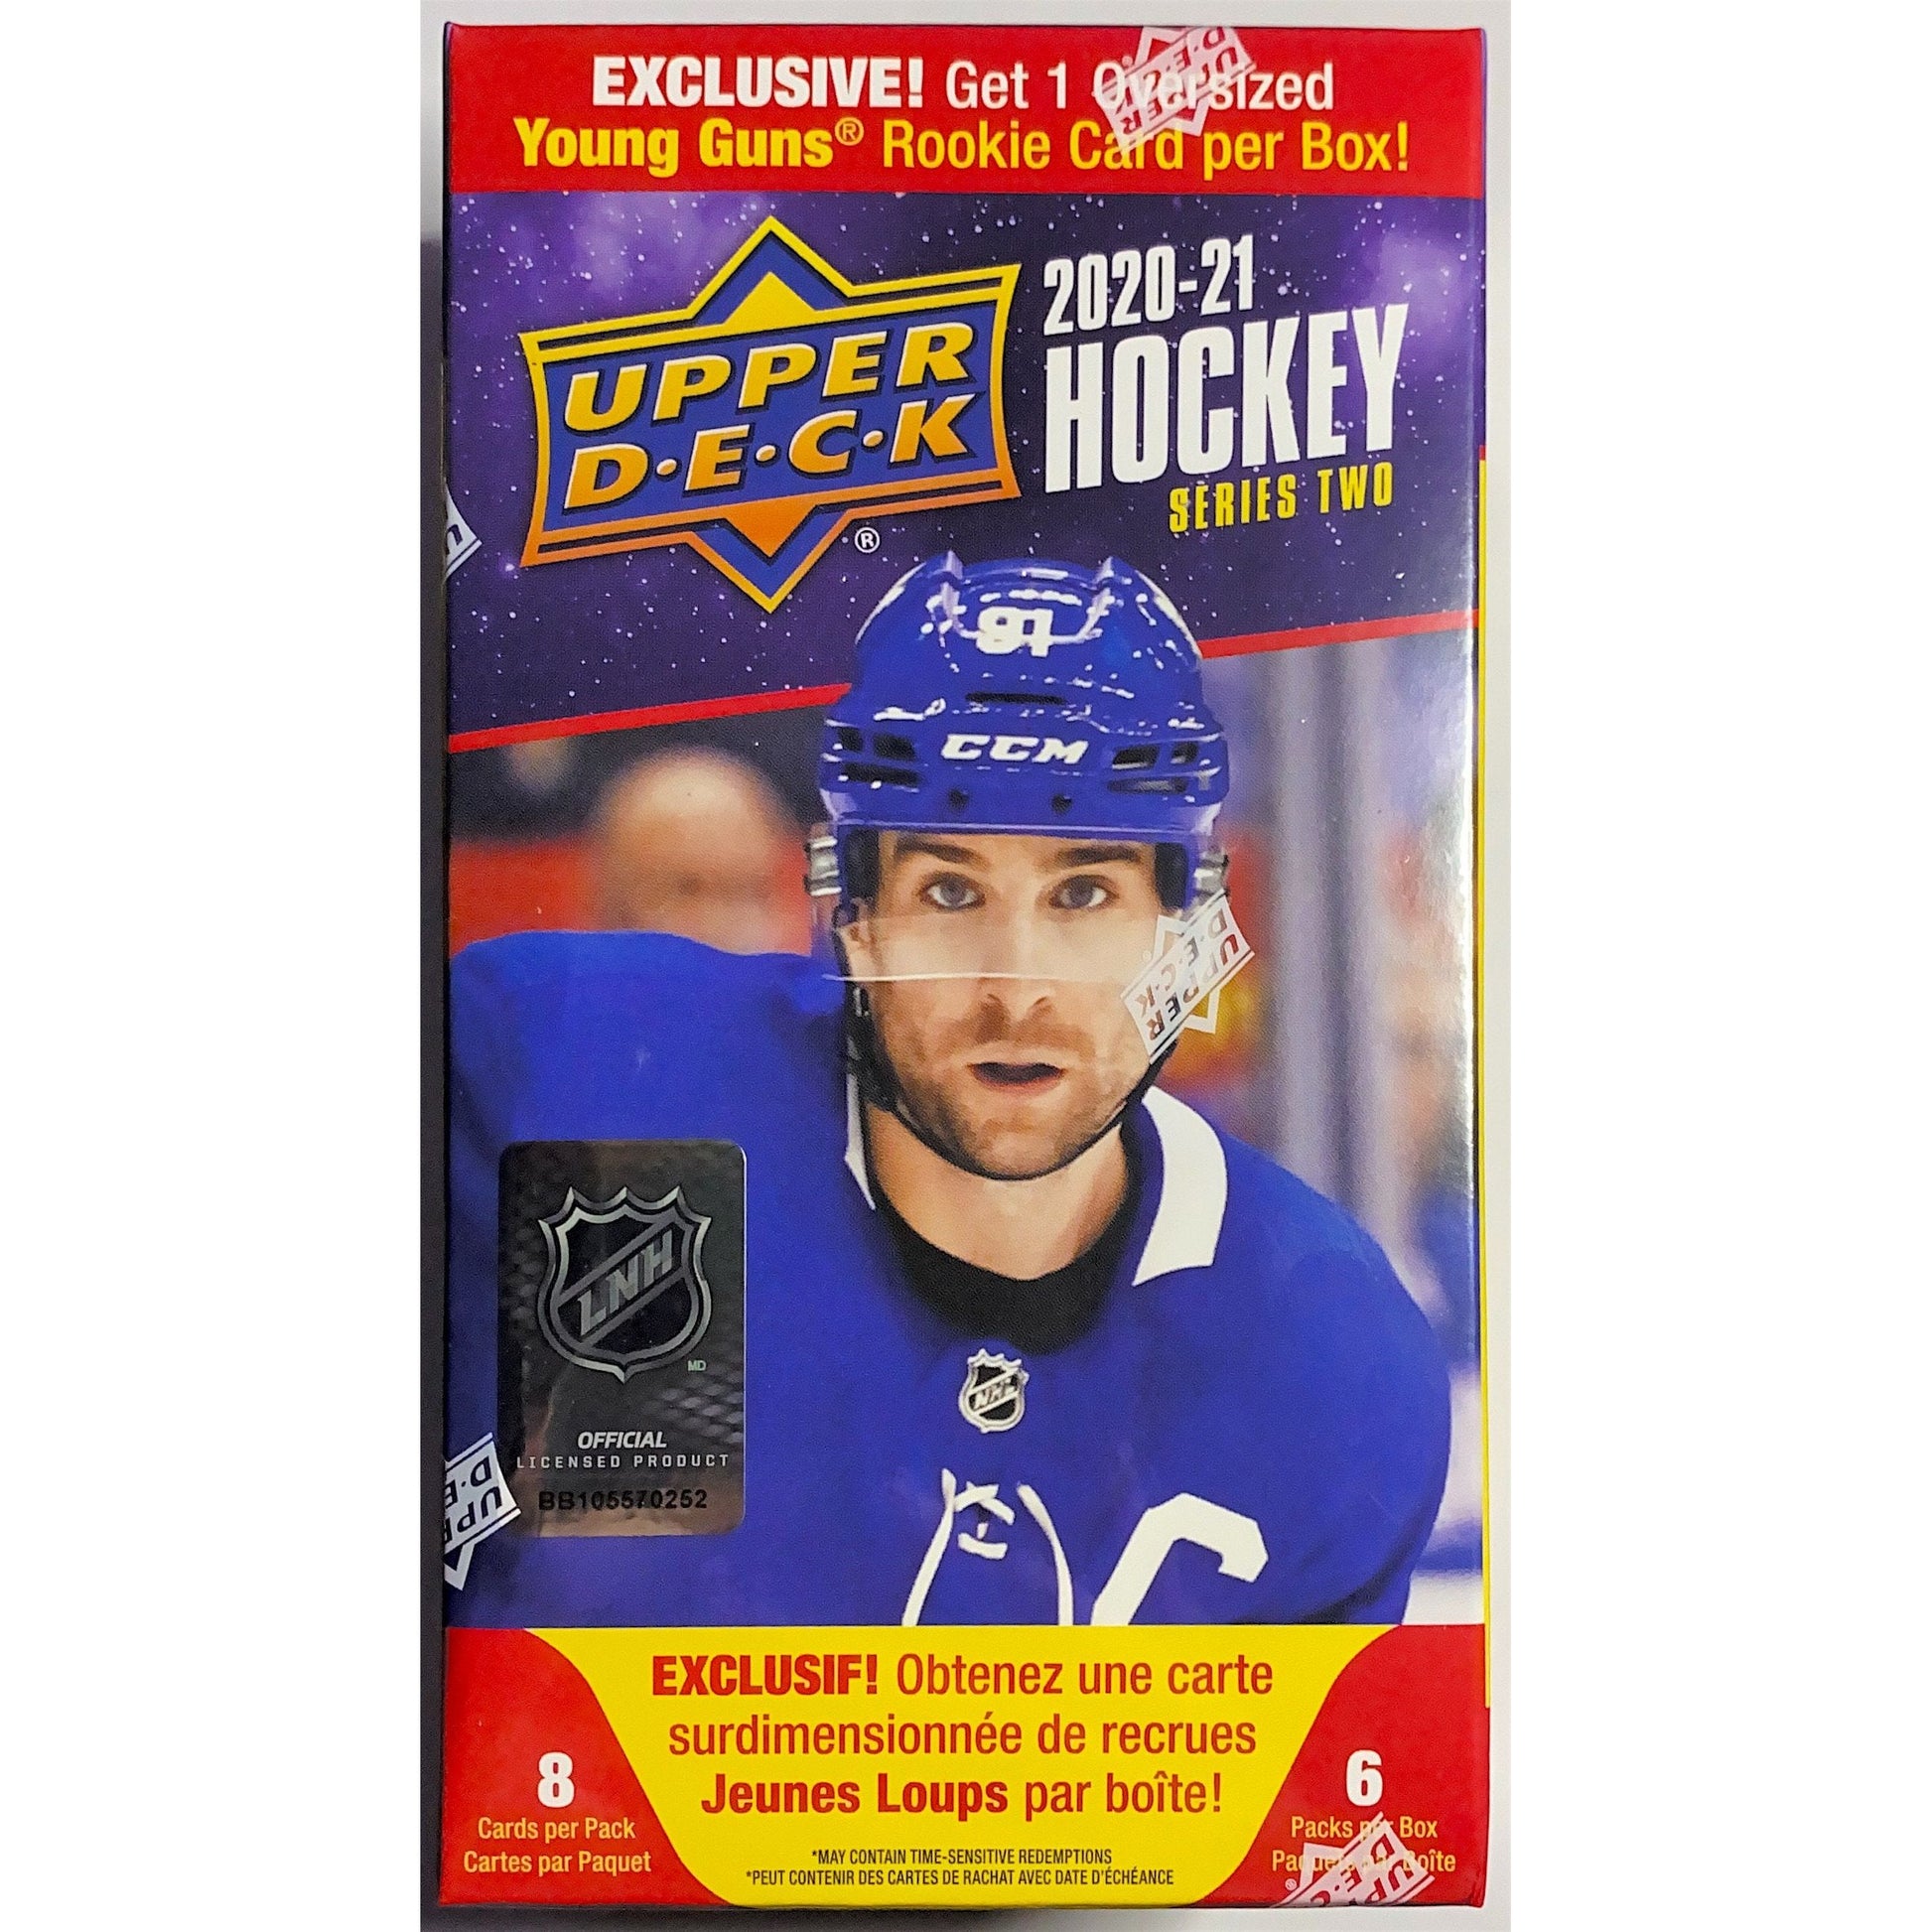  2020-21 Upper Deck Series 2 Hockey Blaster Box (OVERSIZED Young Gun Version)  Local Legends Cards & Collectibles